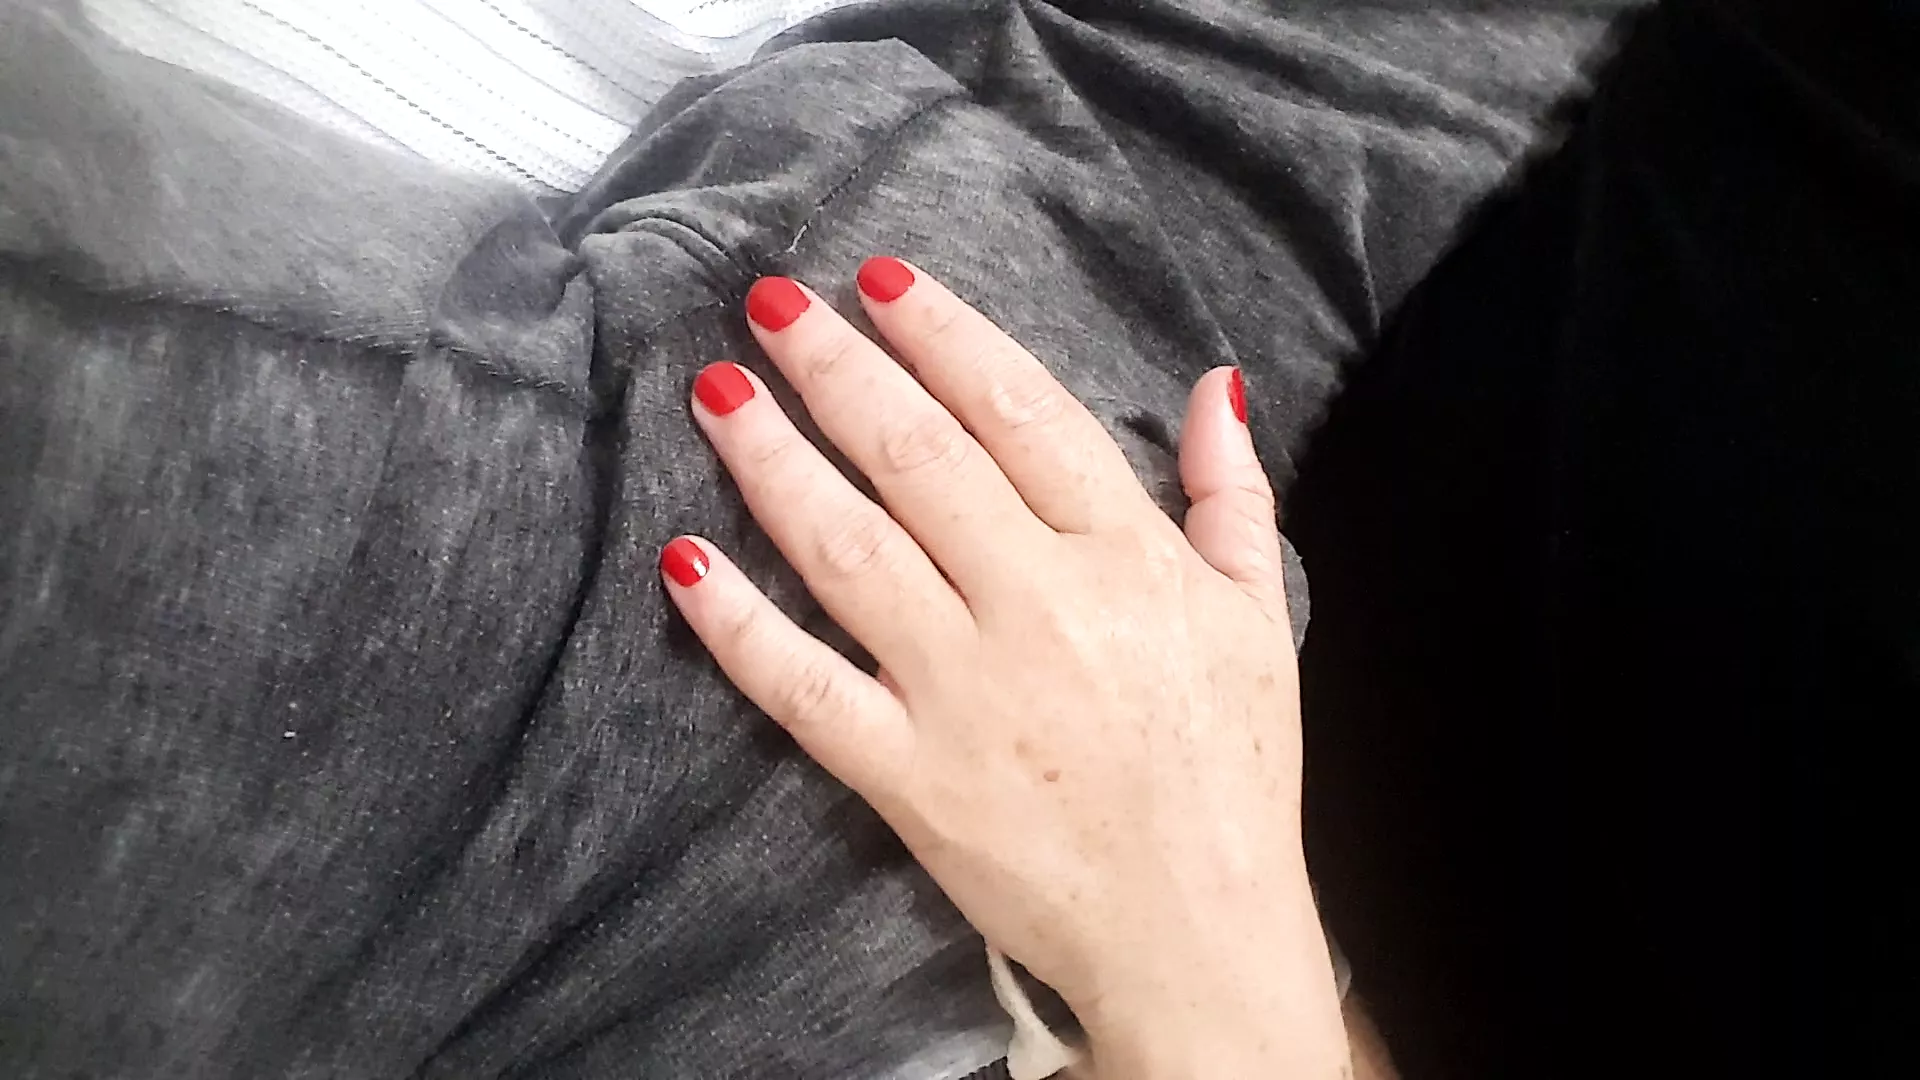 Shy older Gf touches and gropes my cock next to friends photo